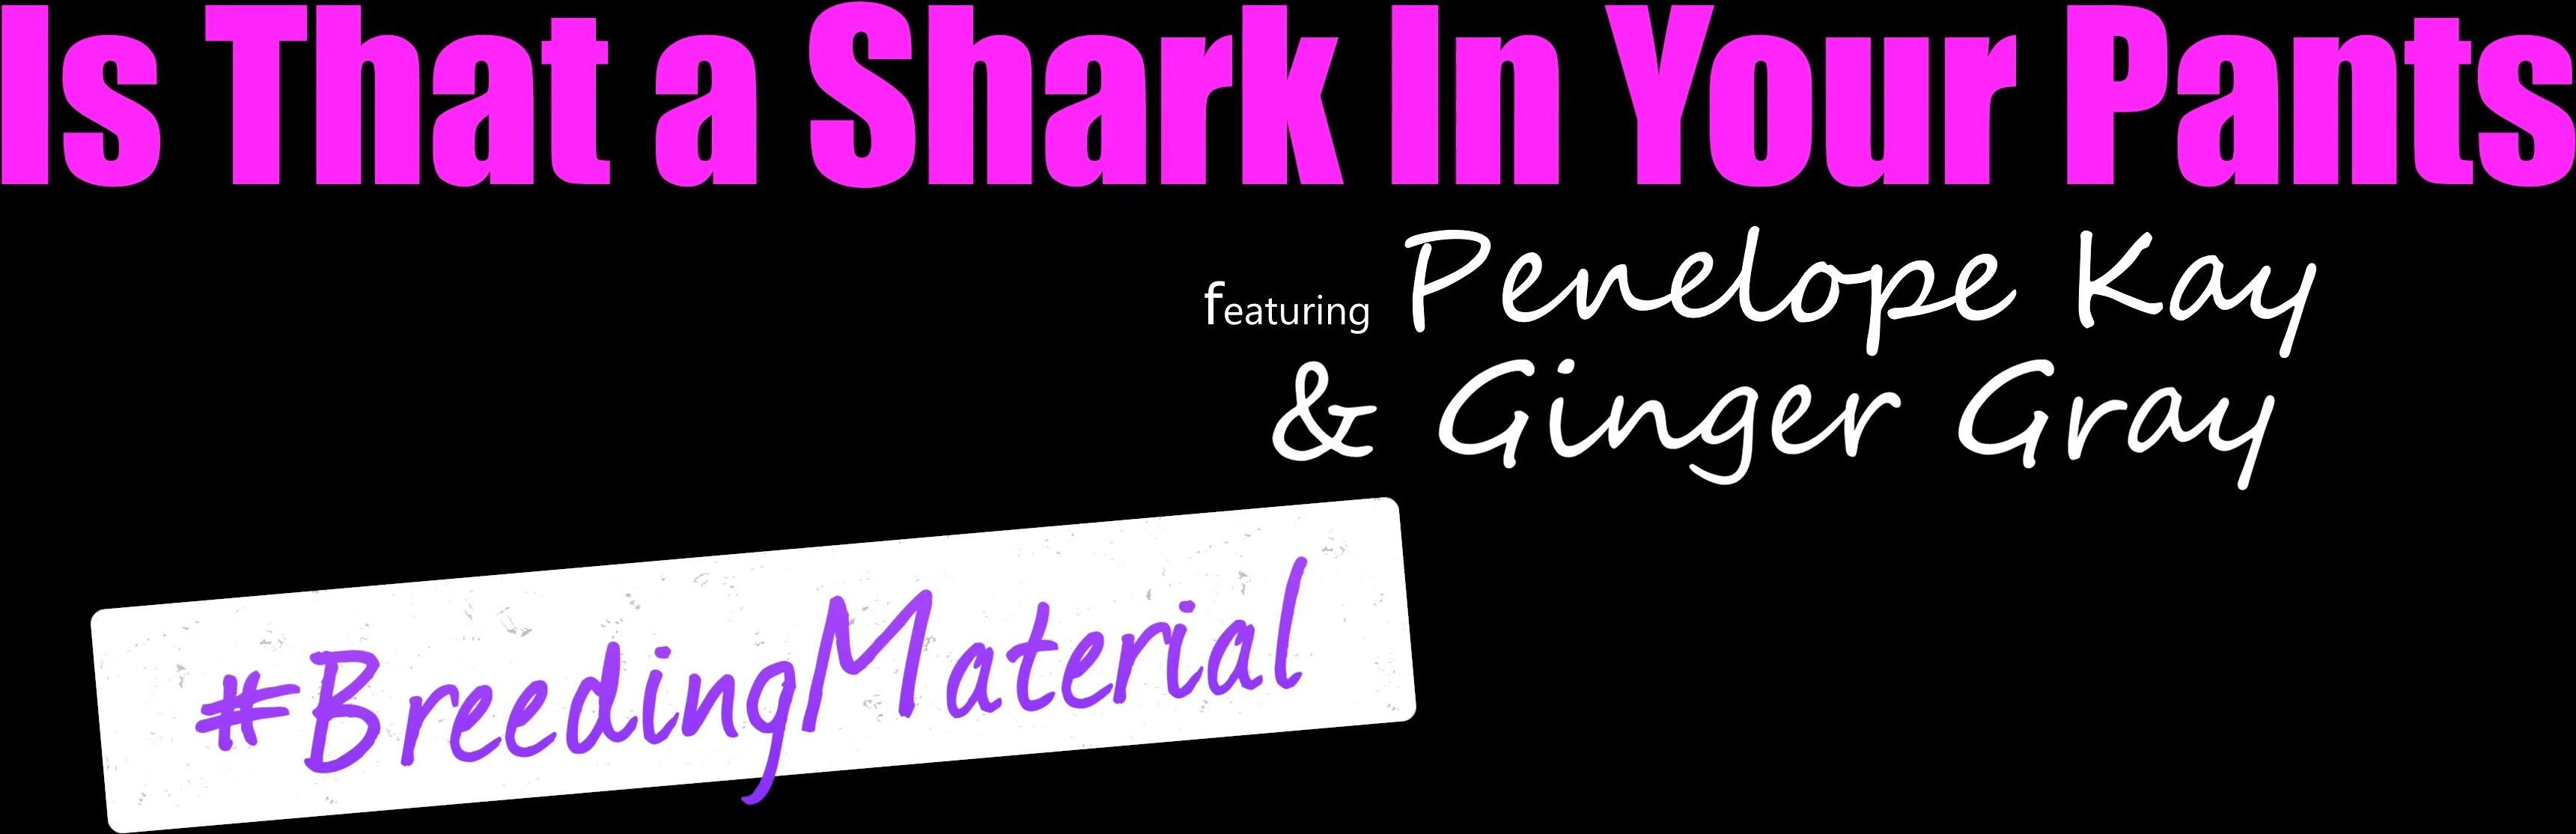 Ginger Gray Penelope Kay - Is That A Shark In Your Pants in 4K